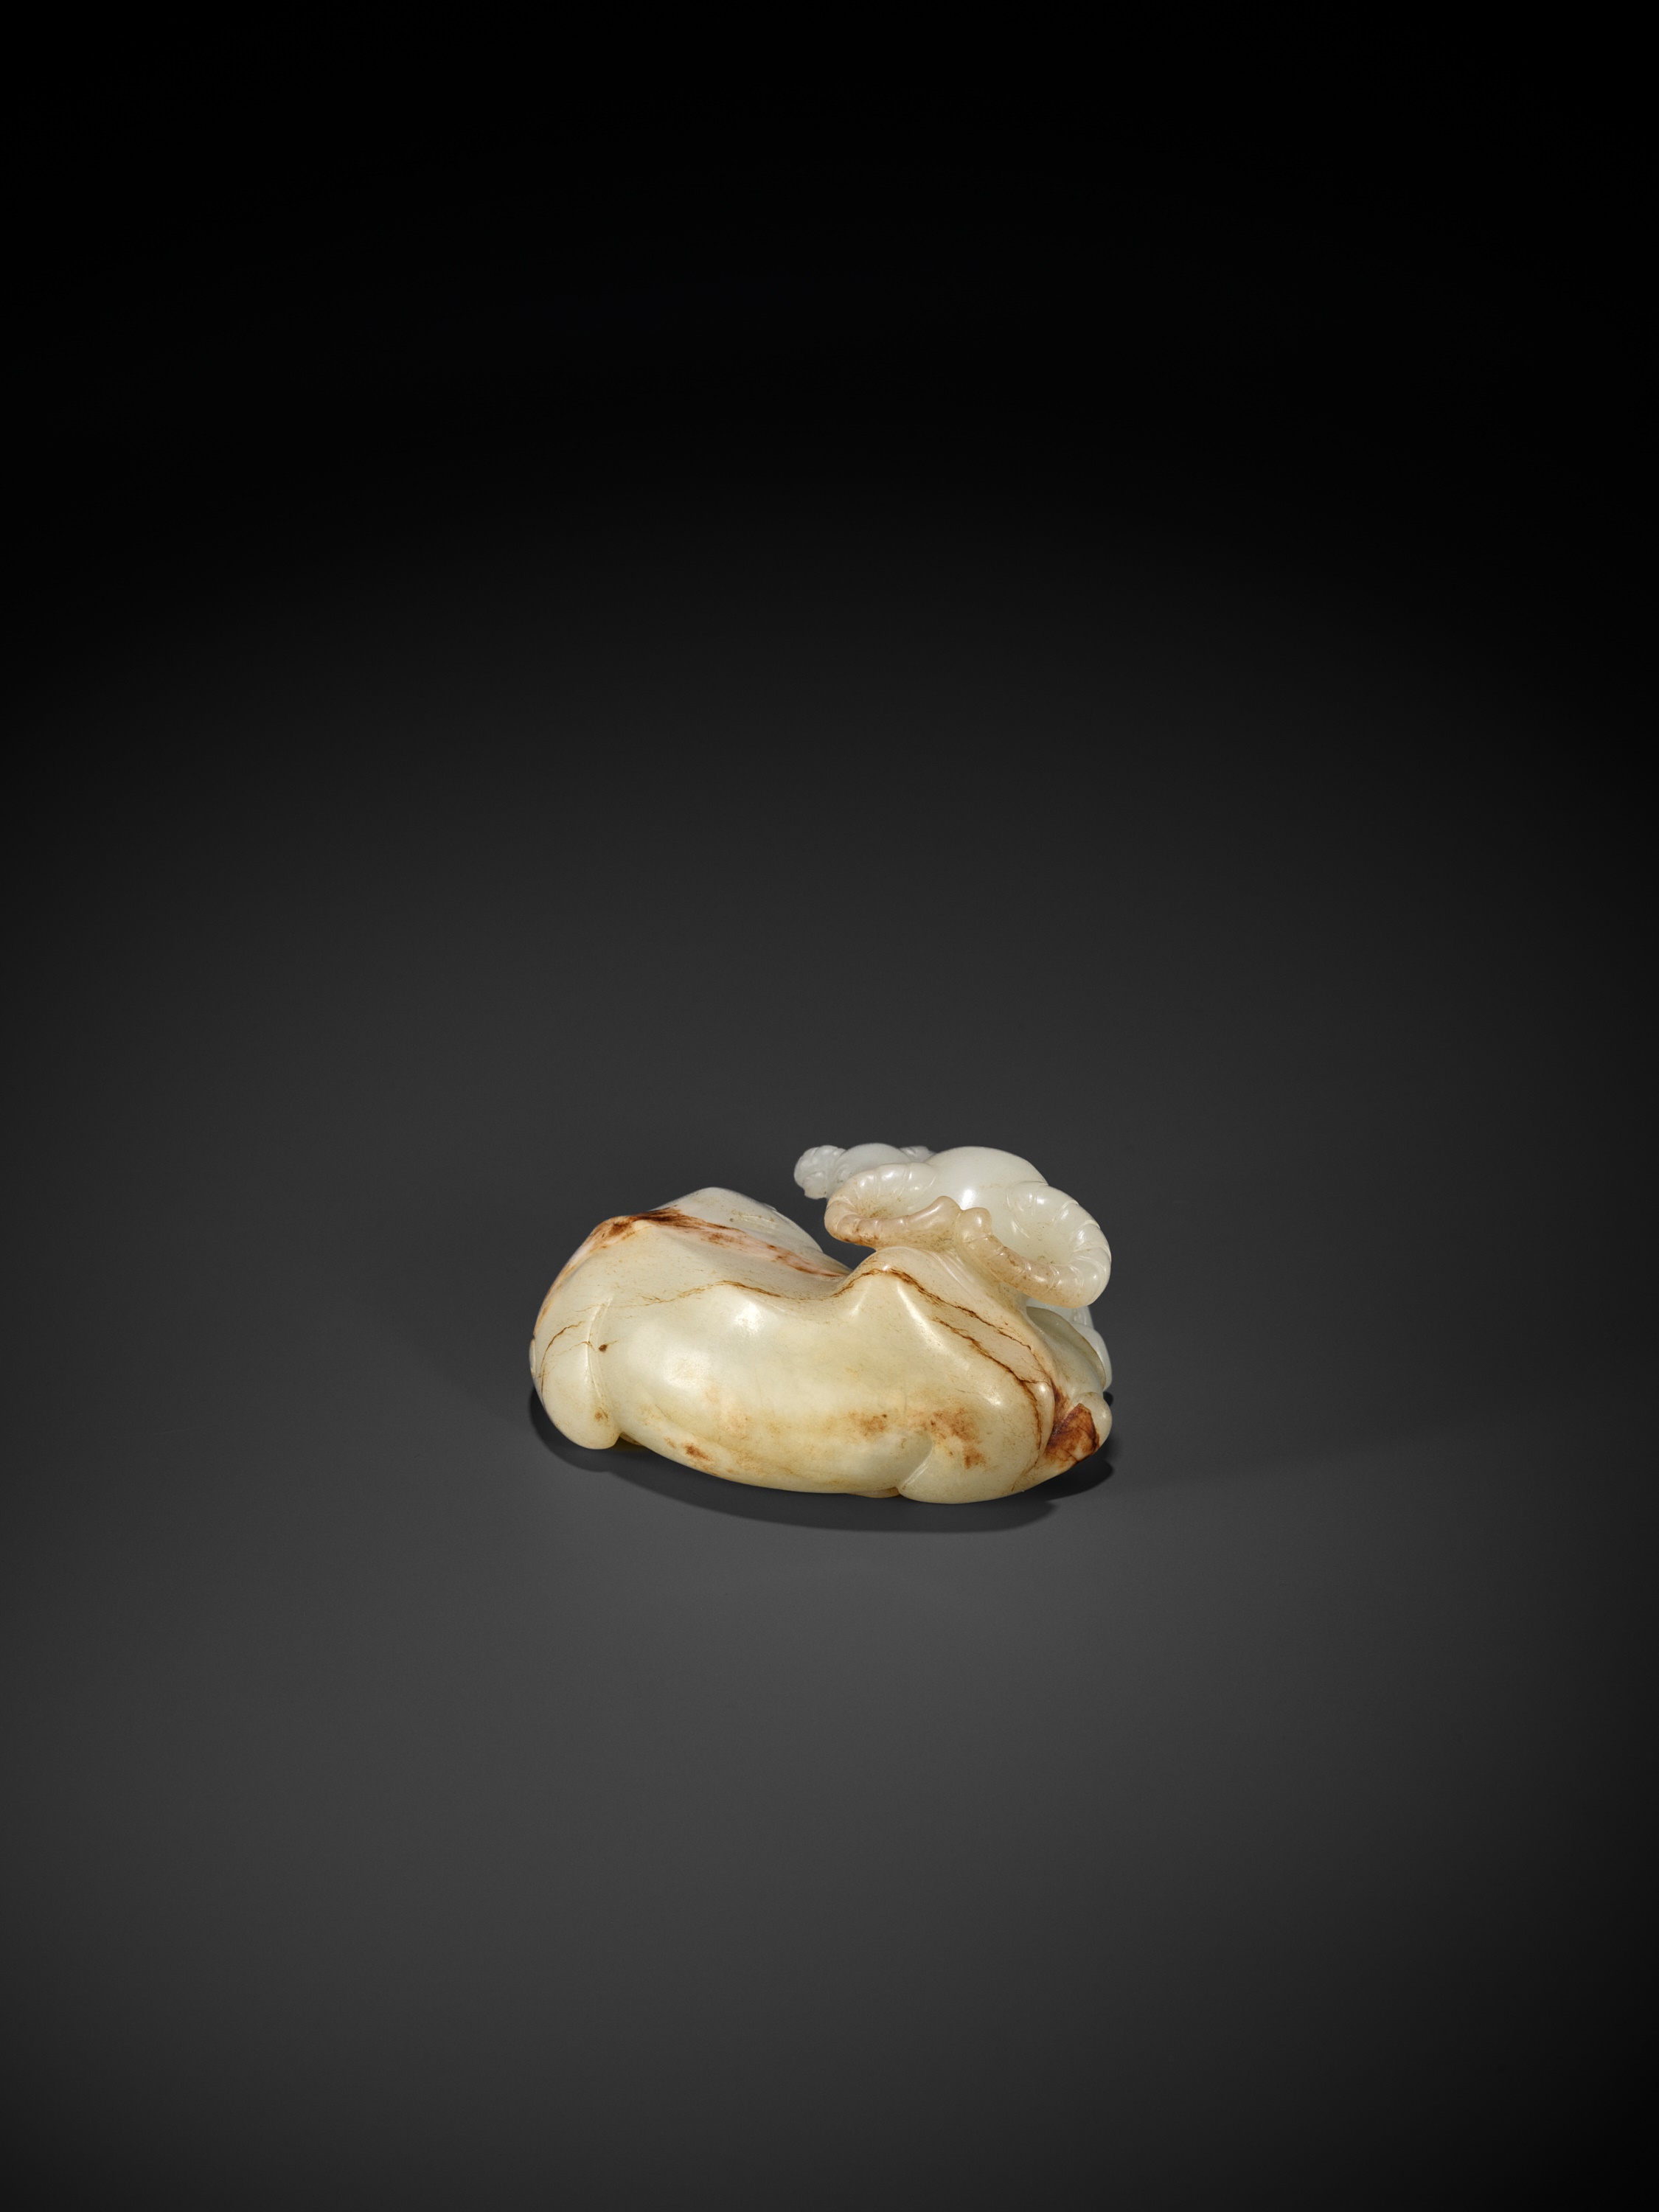 A WHITE AND RUSSET JADE GROUP OF A WATER BUFFALO AND A CALF, 18TH - 19TH CENTURY - Image 9 of 10